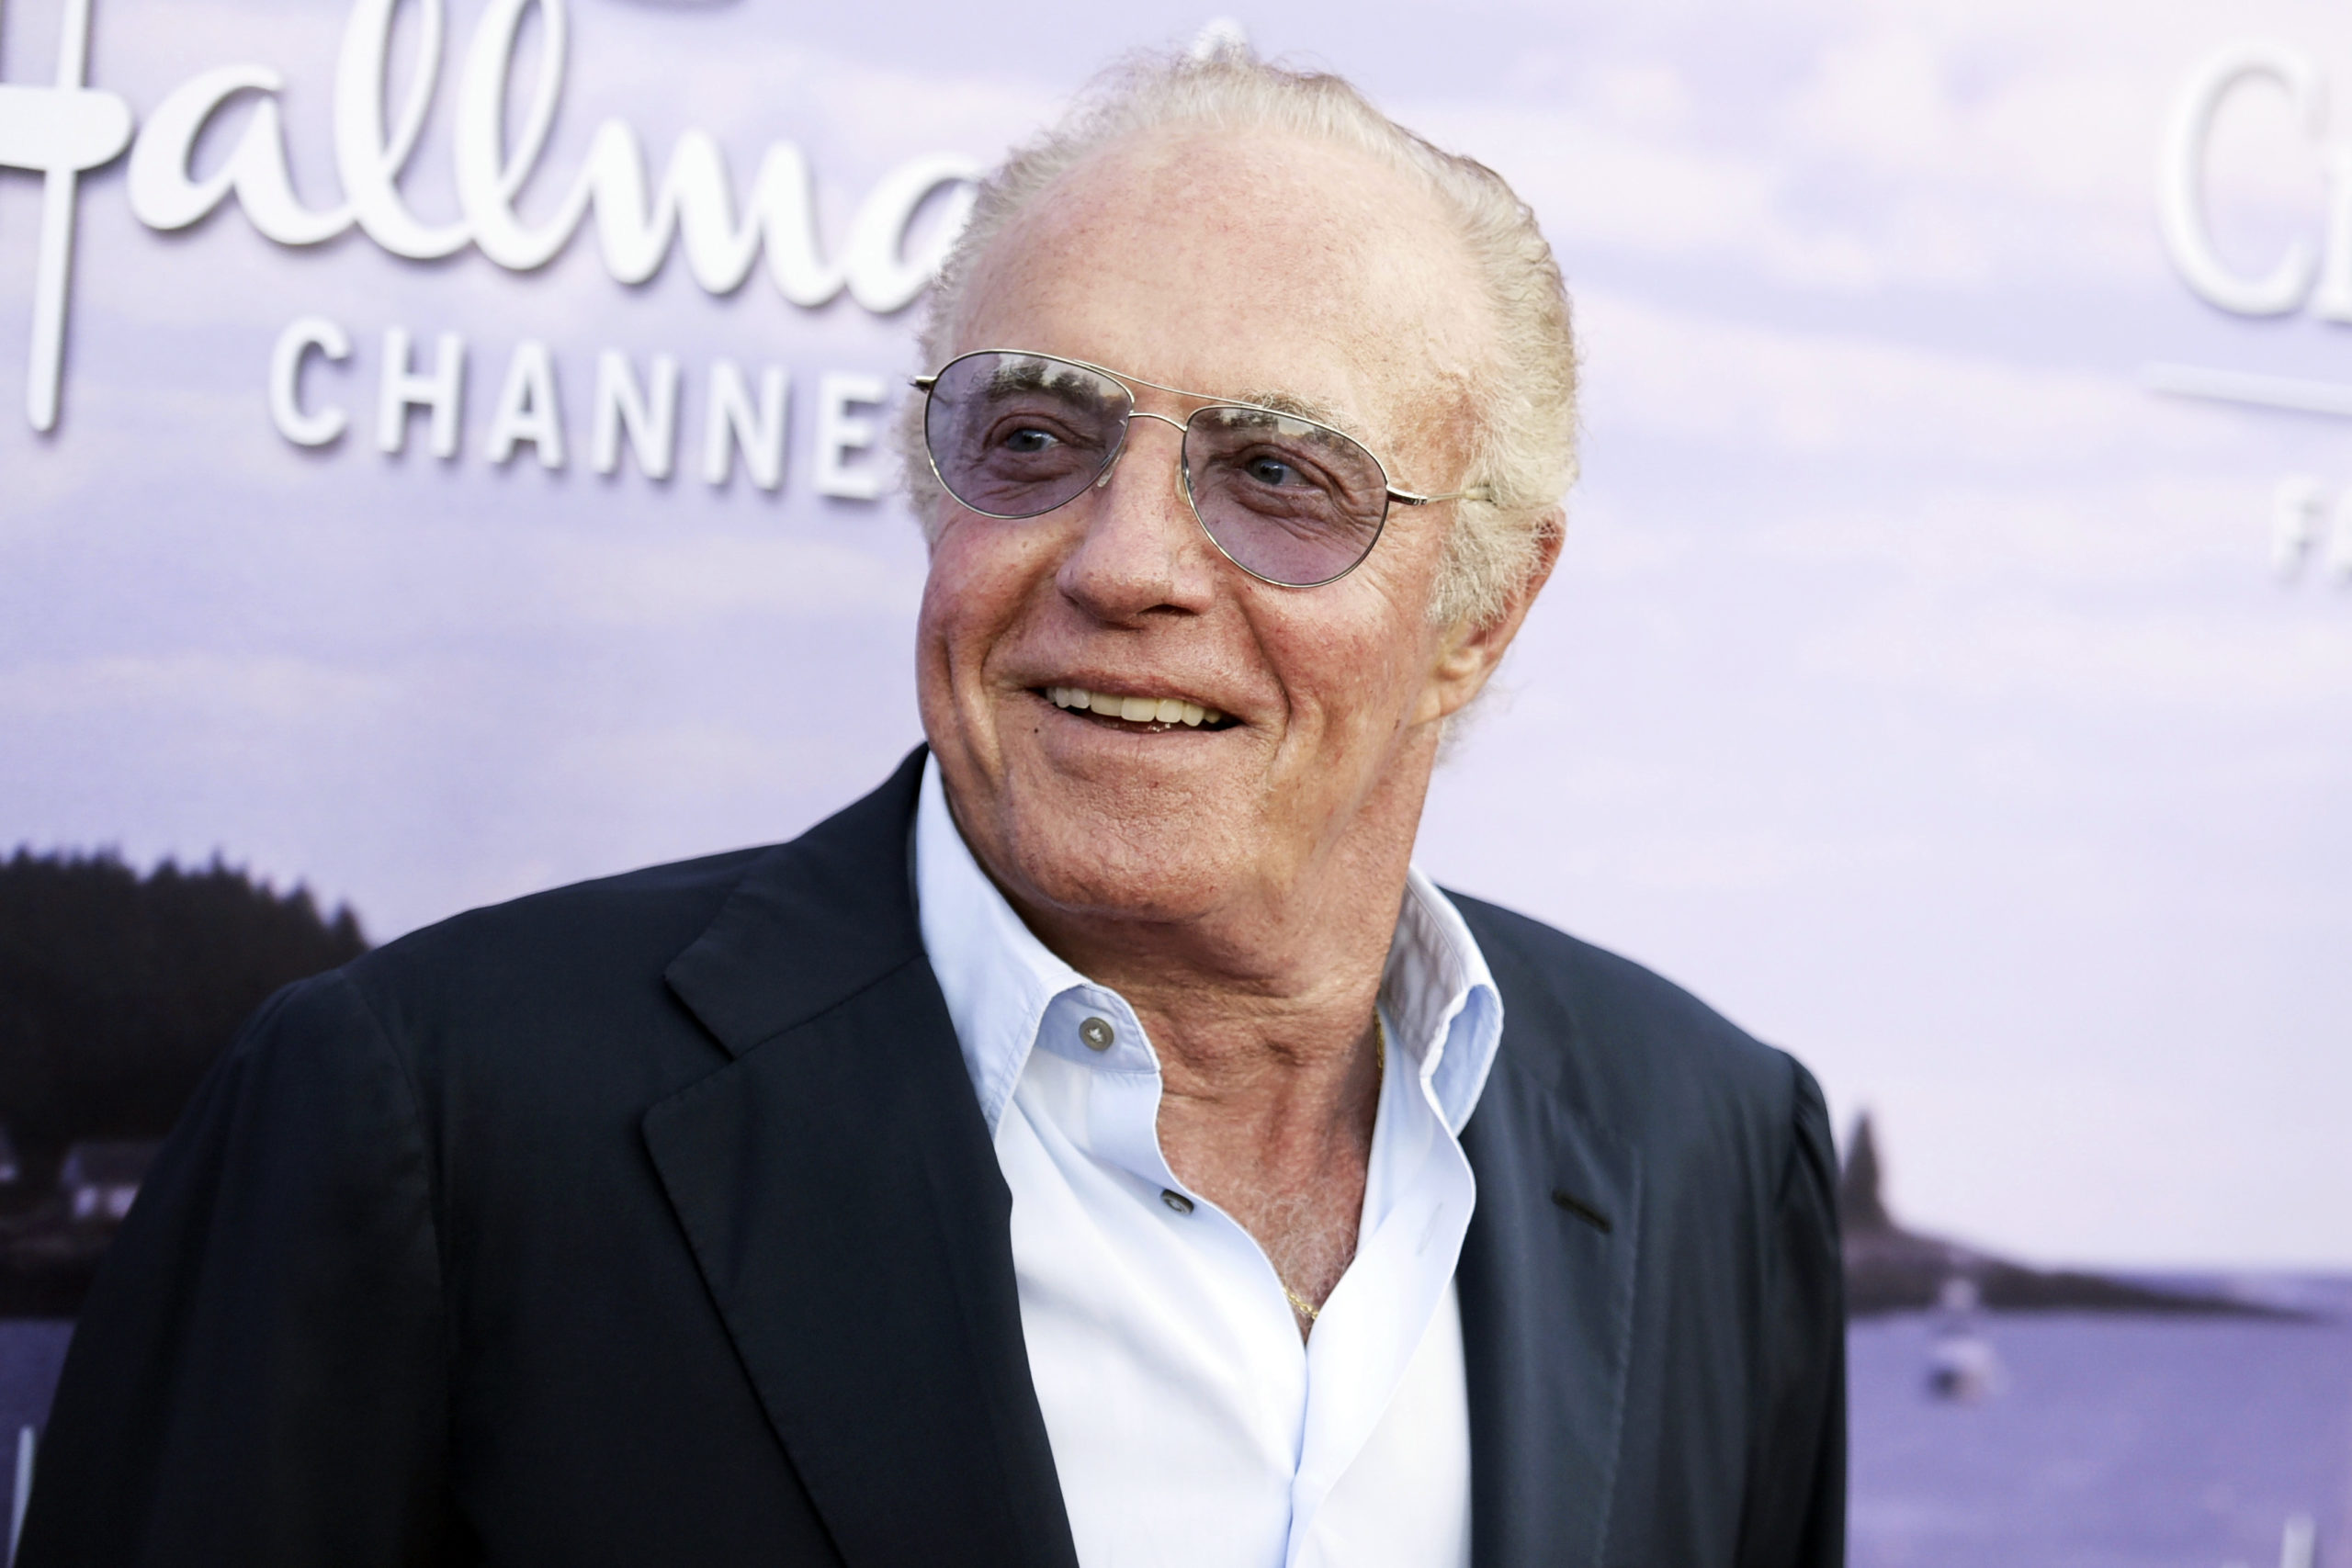 Actor James Caan, seen in a 2016 photo, has died at age 82.